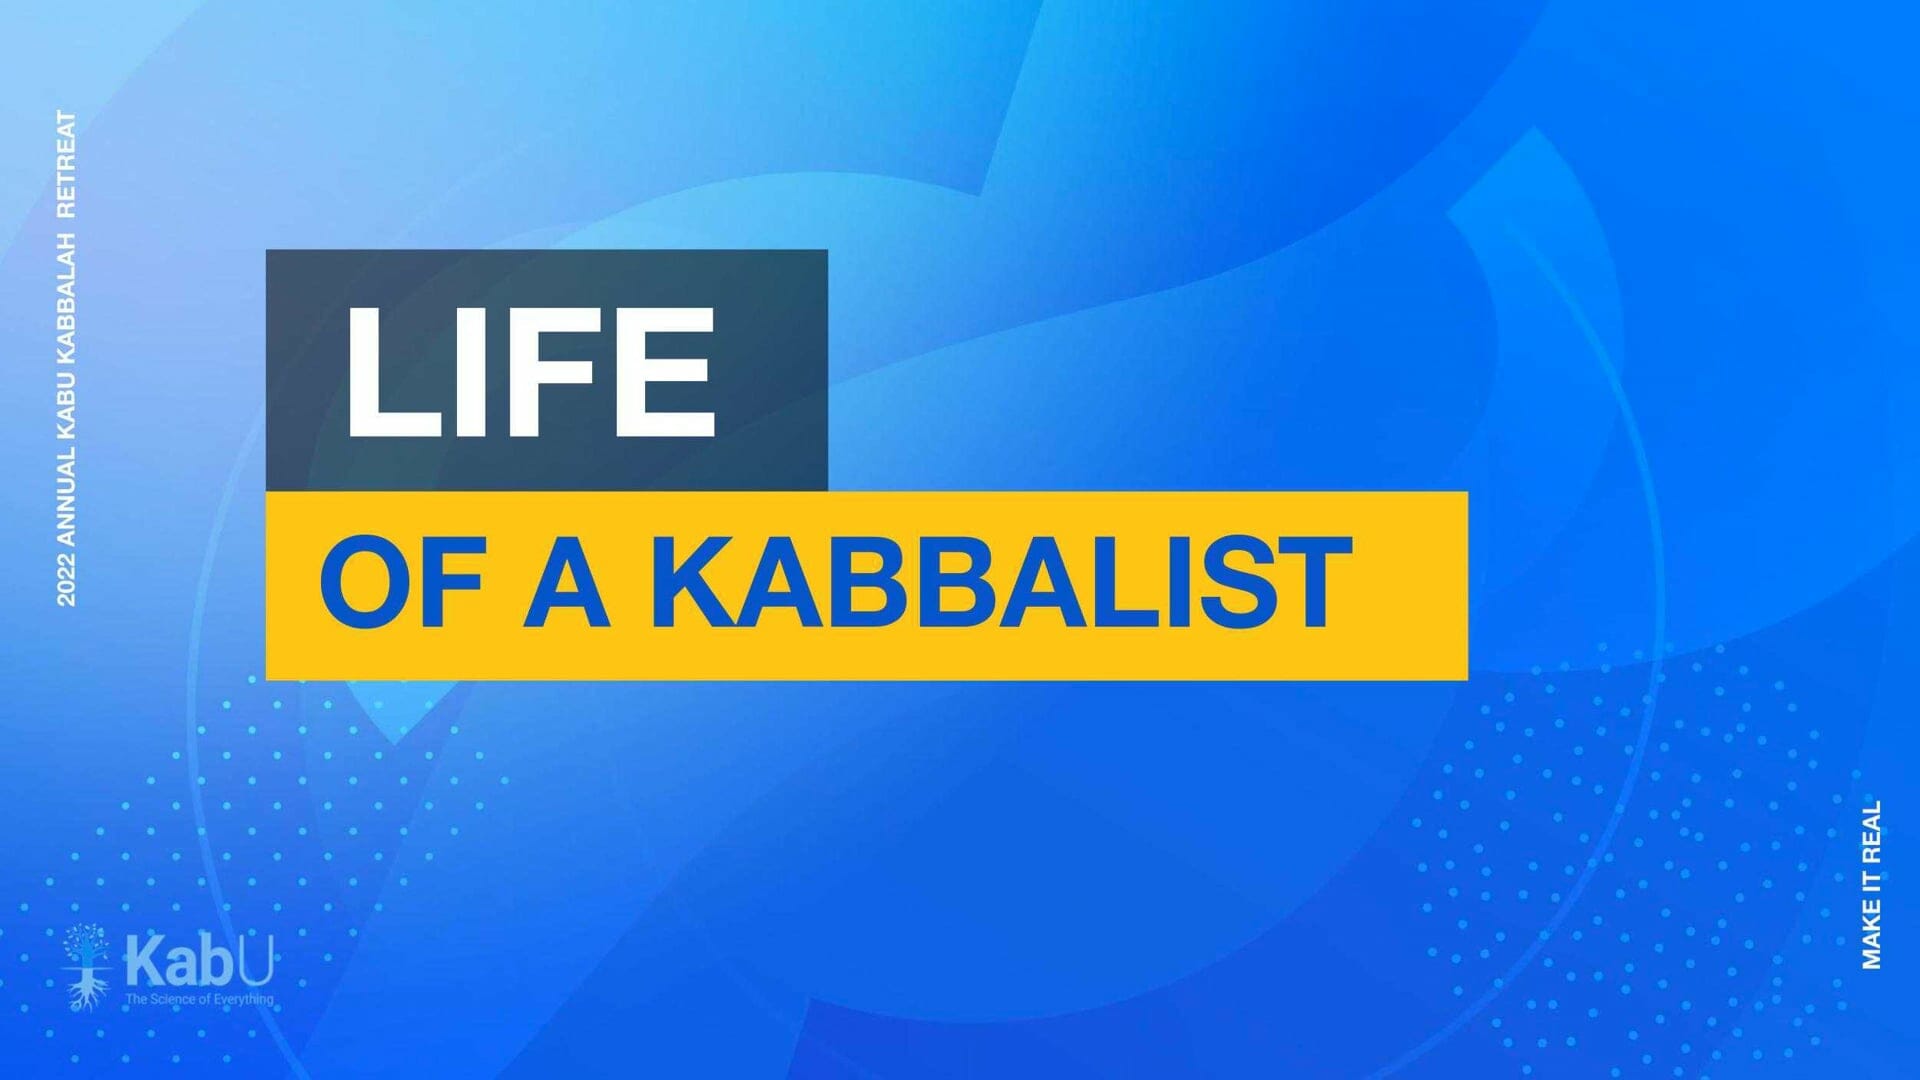 Sept 11, 2022 – Life of a Kabbalist